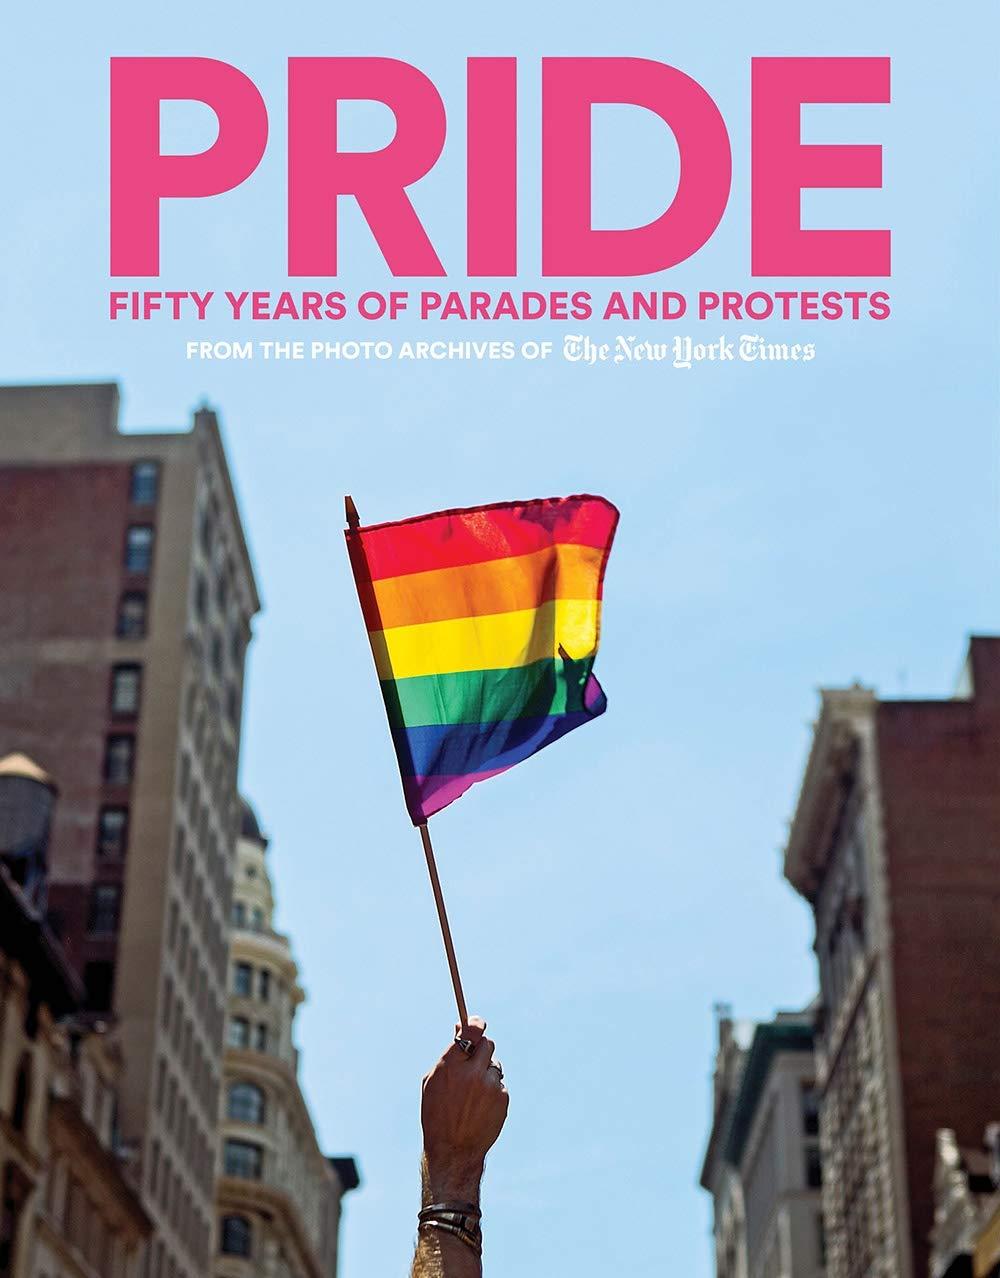 Cover of Pride : fifty years of parades and protests from the photo archives of The New York Times, edited by Samantha Weiner